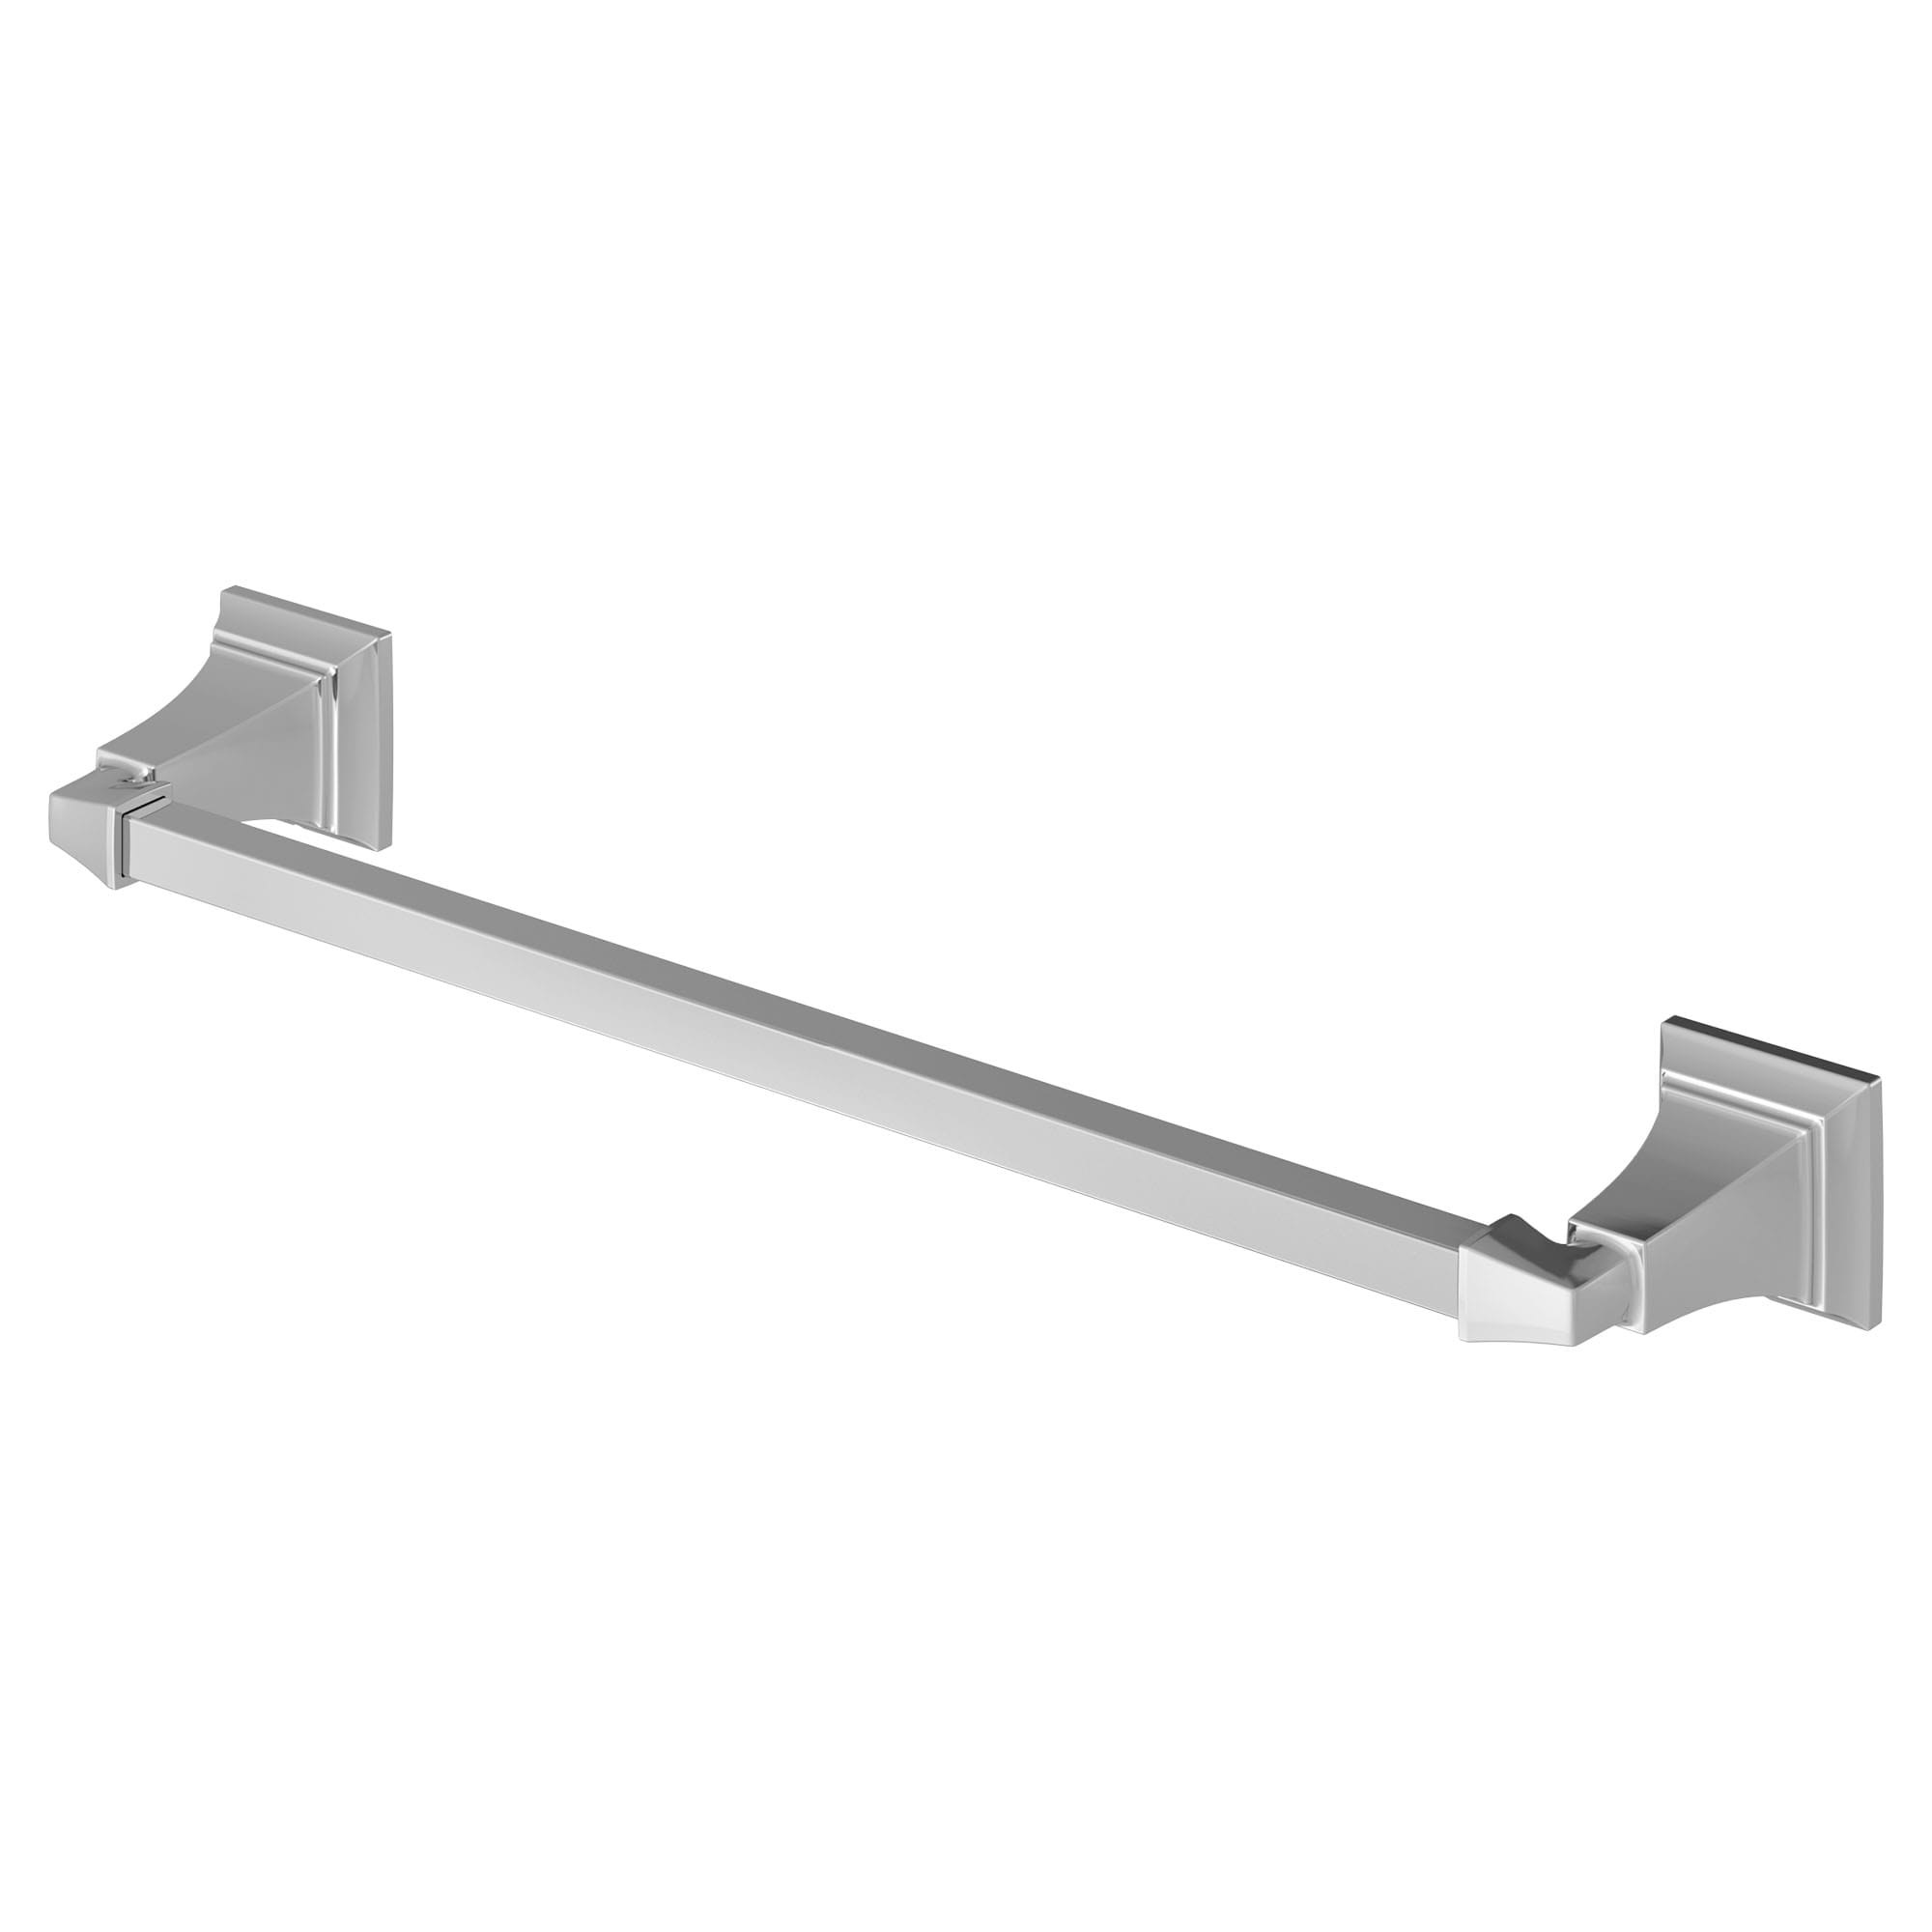 Town Square S 18 Inch Towel Bar CHROME